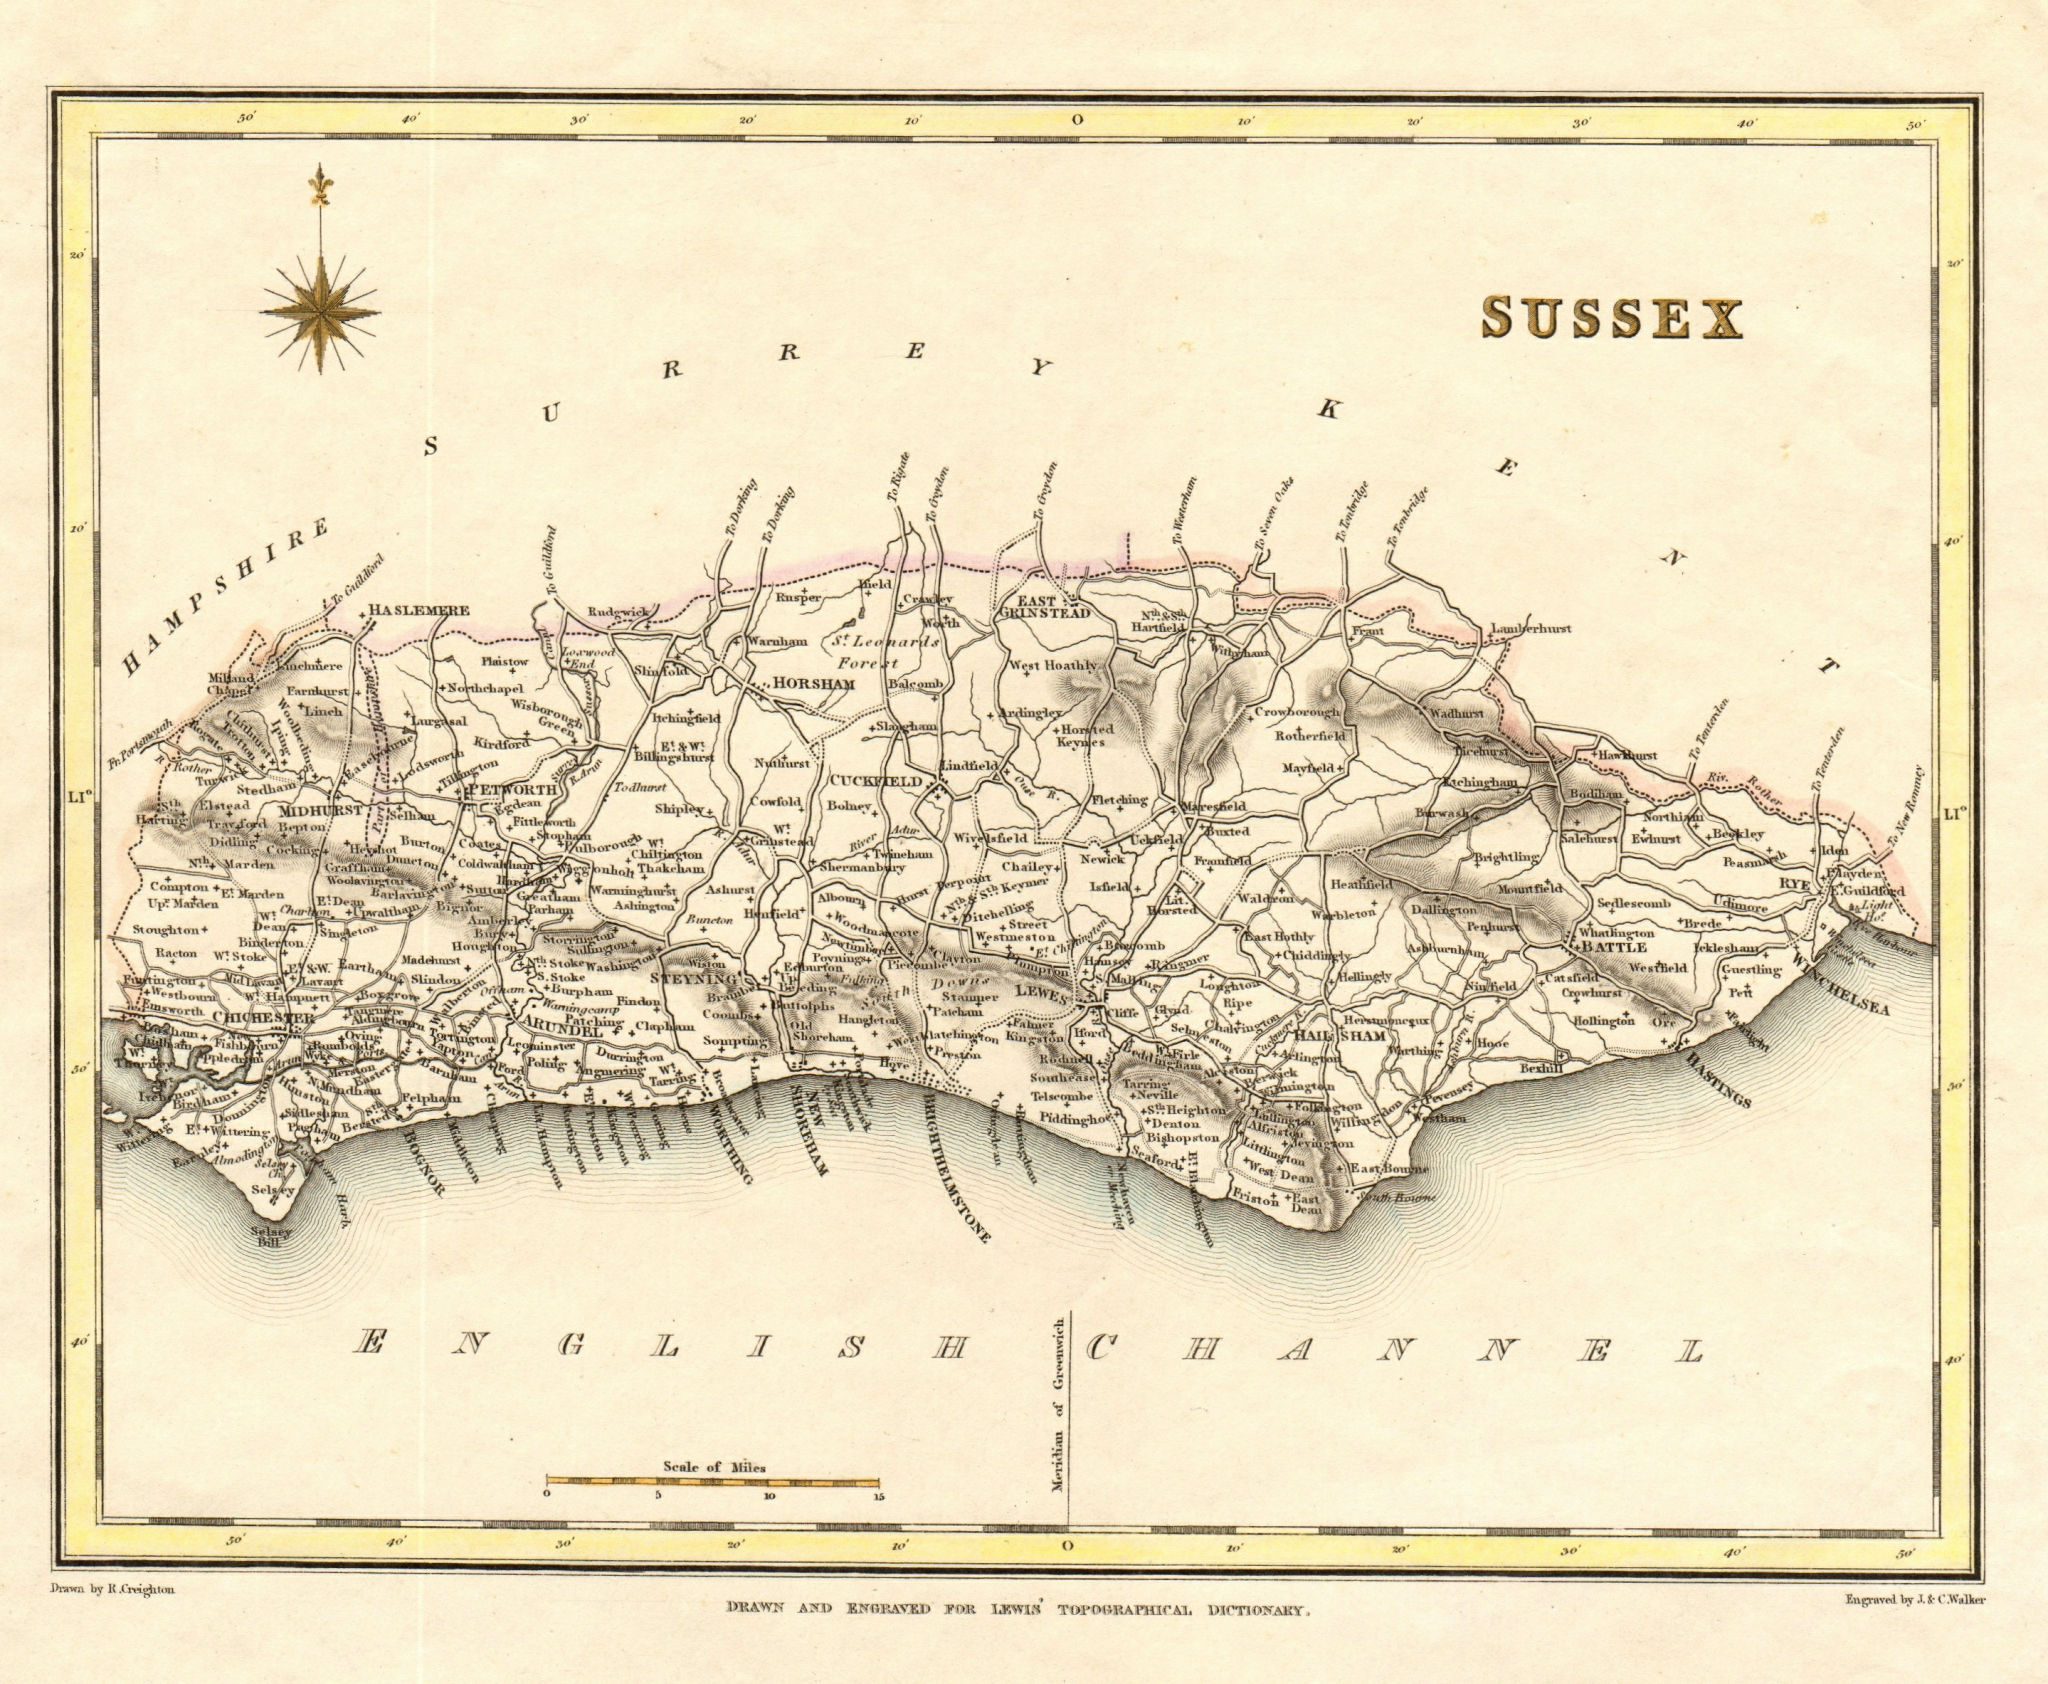 Associate Product Antique county map of SUSSEX by Creighton & Walker for Lewis. Coloured c1840